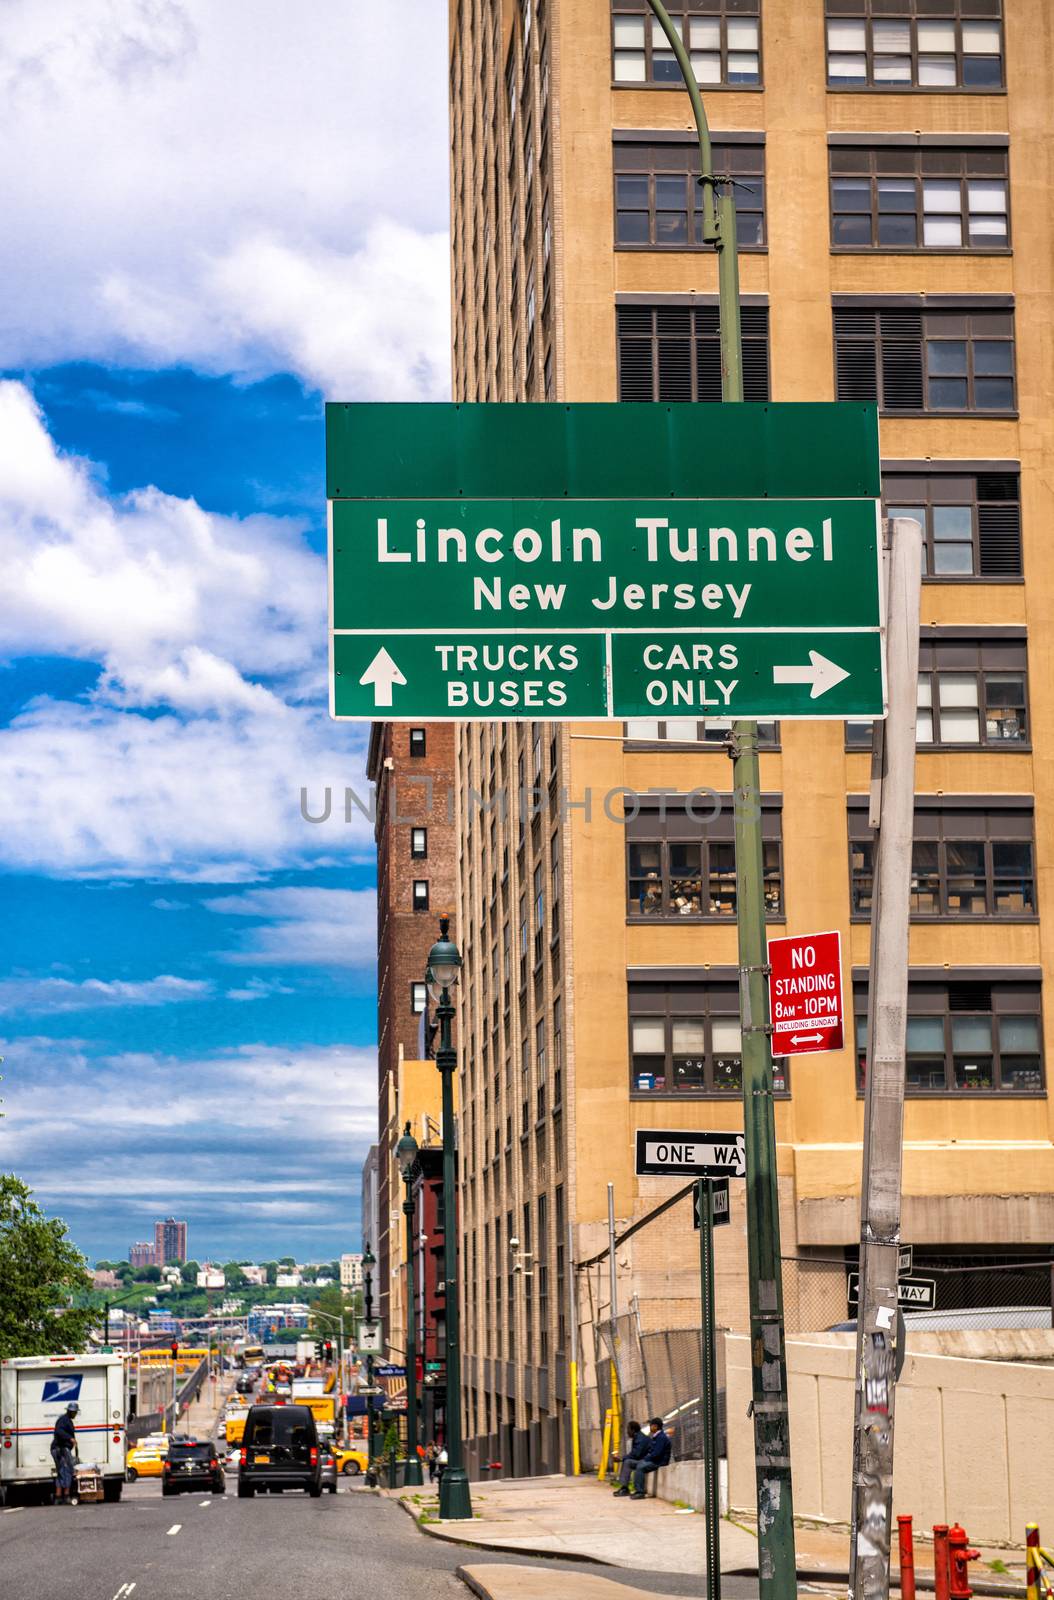 Lincoln Tunnel signage in Manhattan with city skyline.